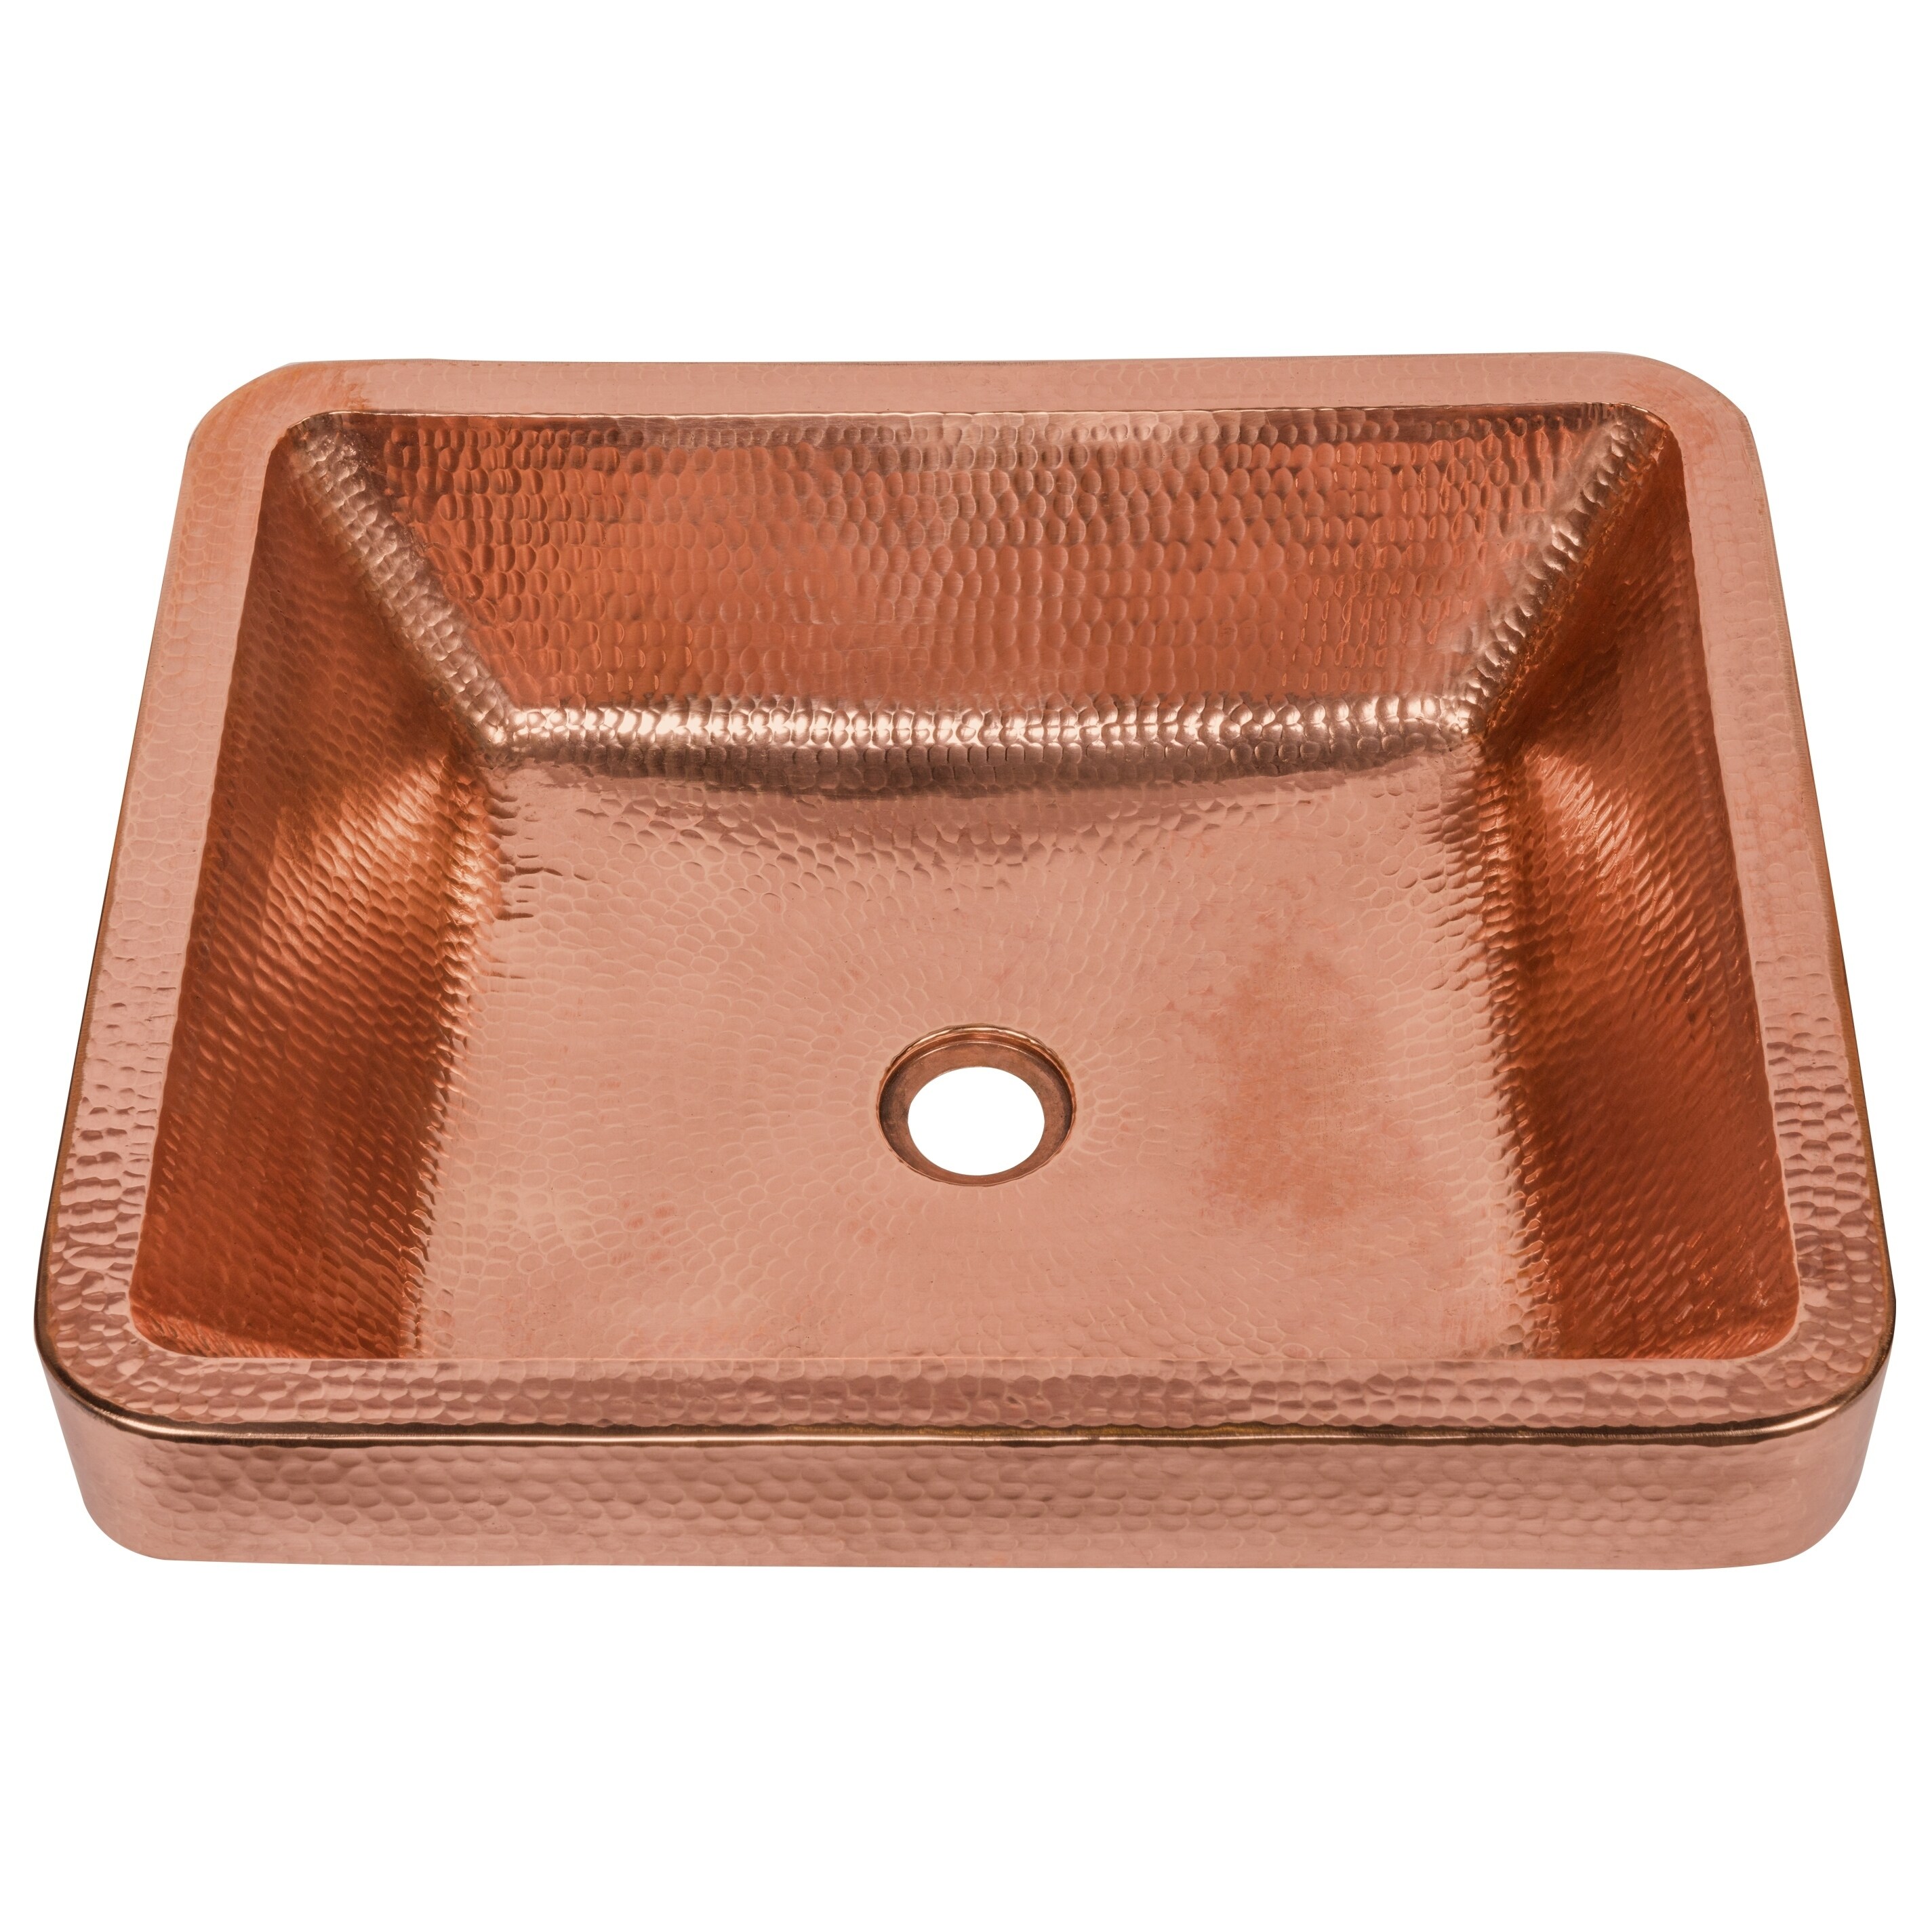 19 In Rectangle Skirted Vessel Hammered Copper Sink In Polished Copper